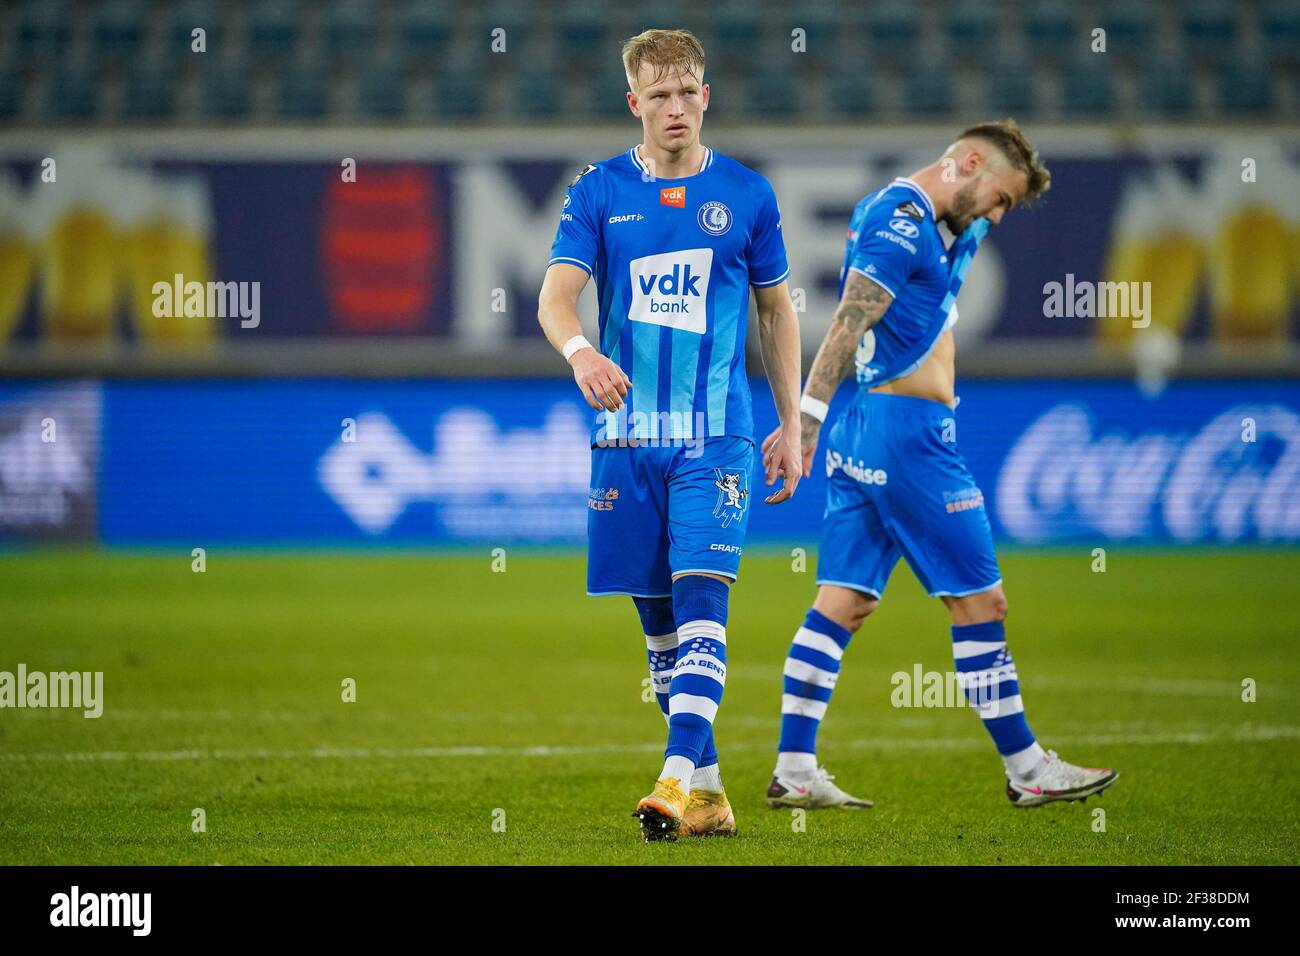 GENT, BELGIUM - MARCH 15: Andreas Hanche Olsen of KAA Gent disappointed during the Jupiler Pro League match between KAA Gent and Club Brugge KV at Ghe Stock Photo